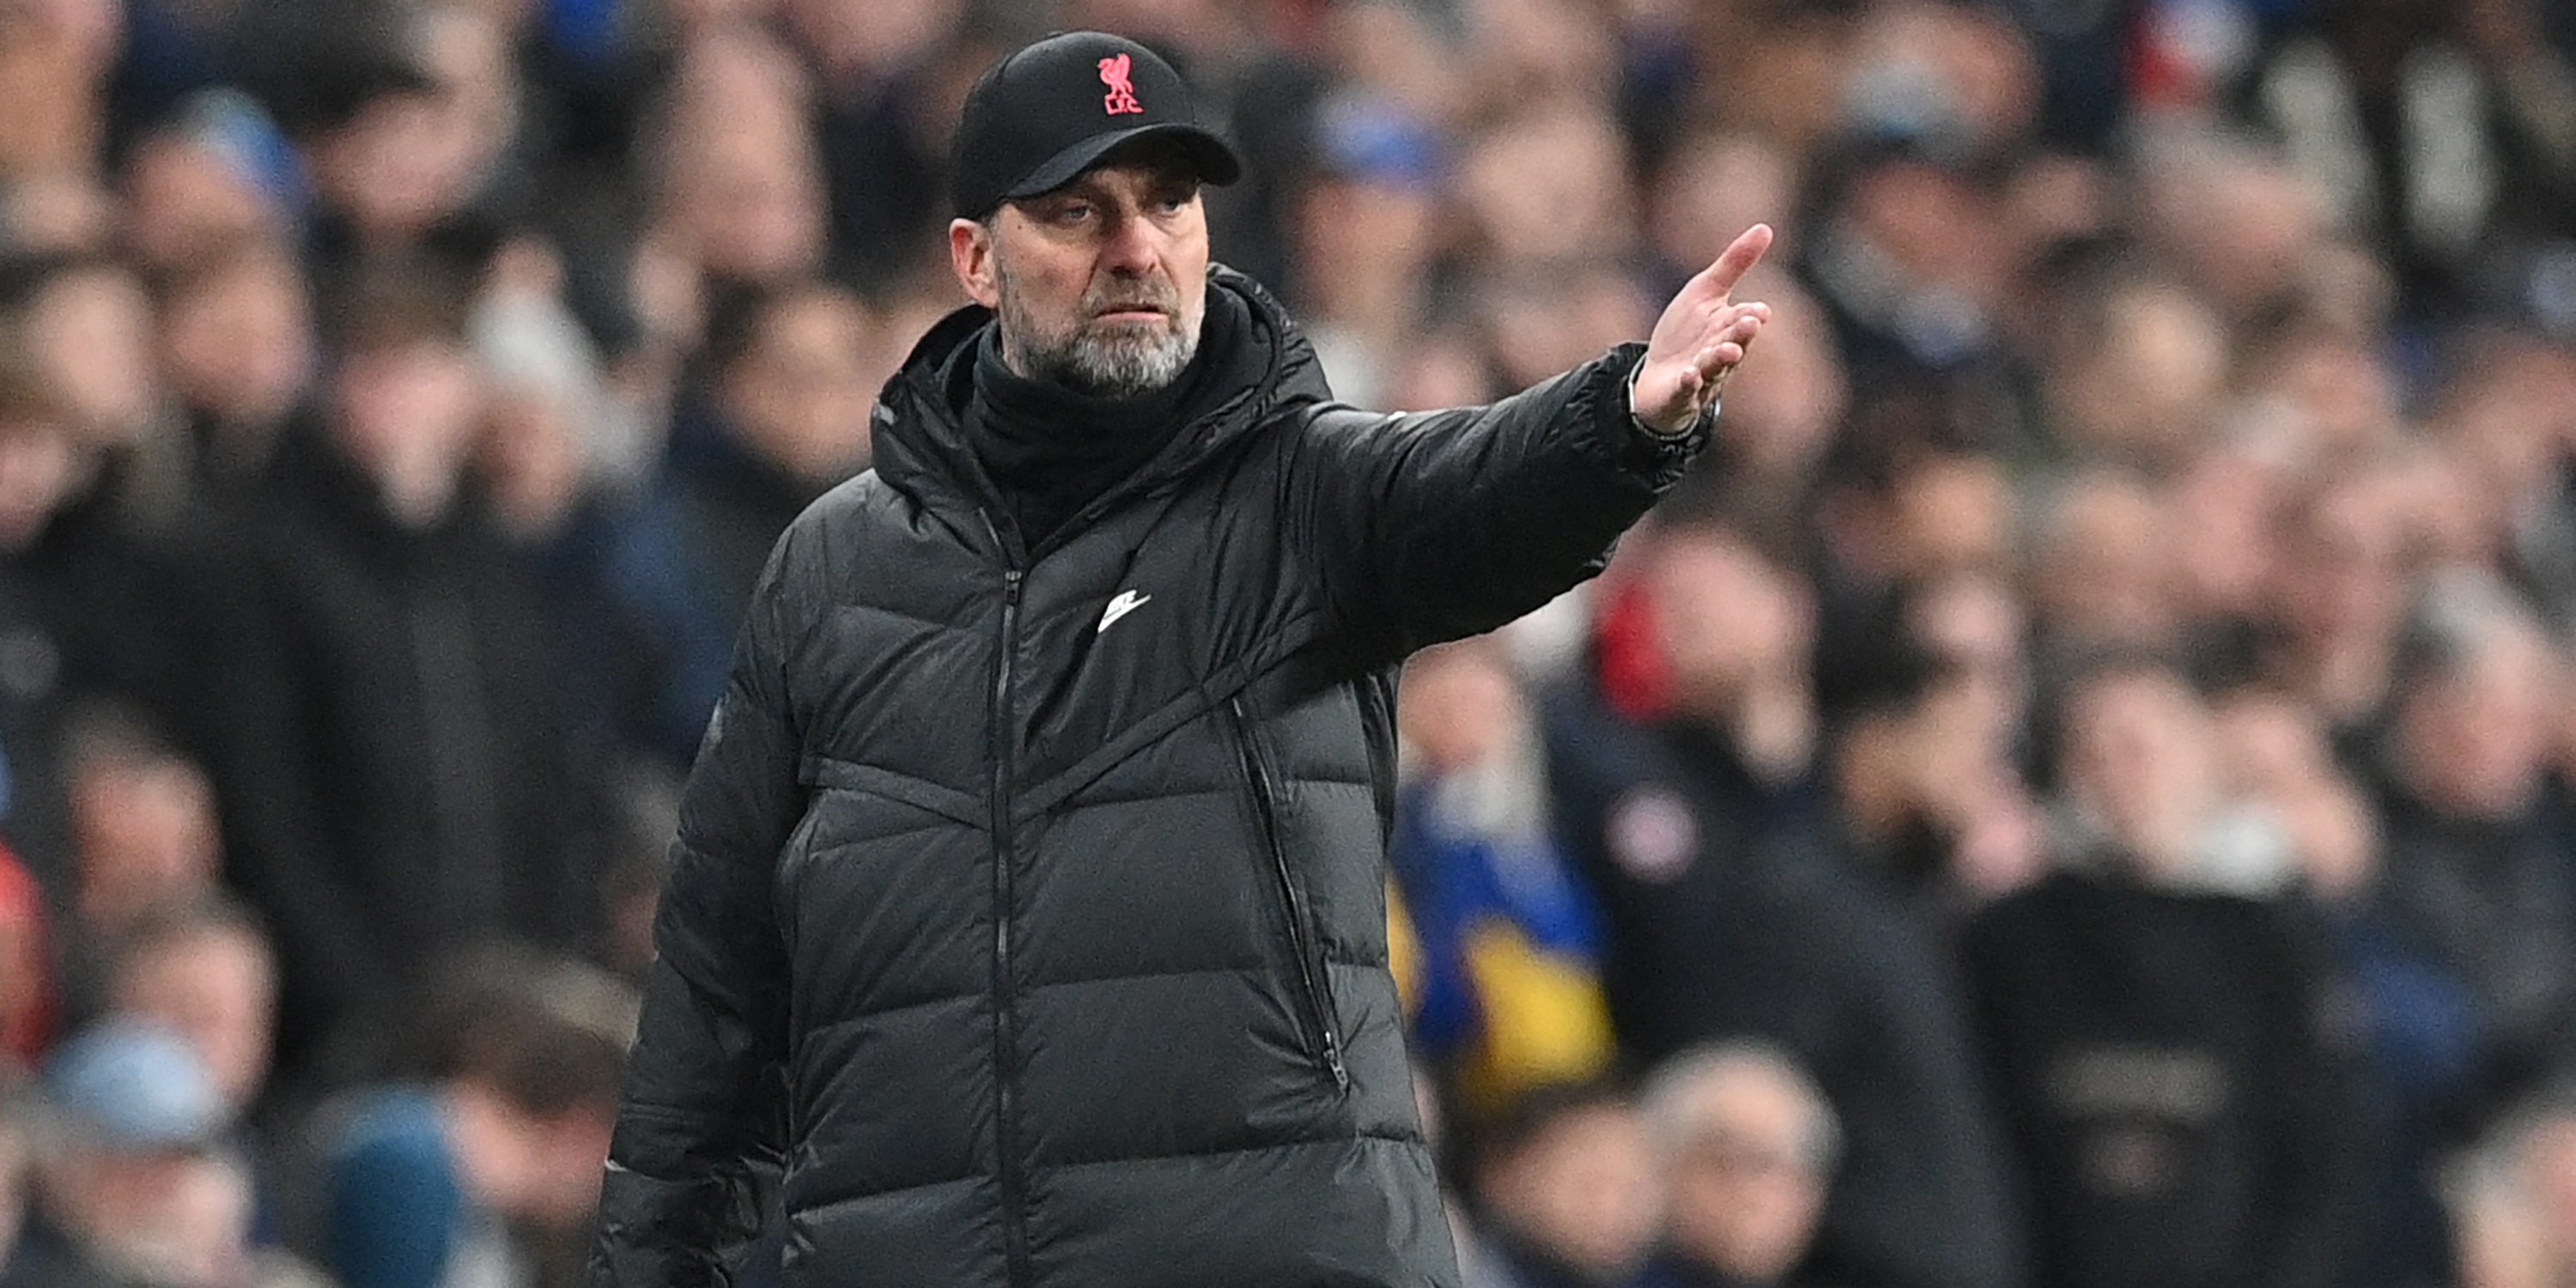 Jurgen Klopp claims Spurs will pose his Liverpool side with the ‘biggest challenge for a long time’ ahead of their Premier League clash at Anfield tomorrow night